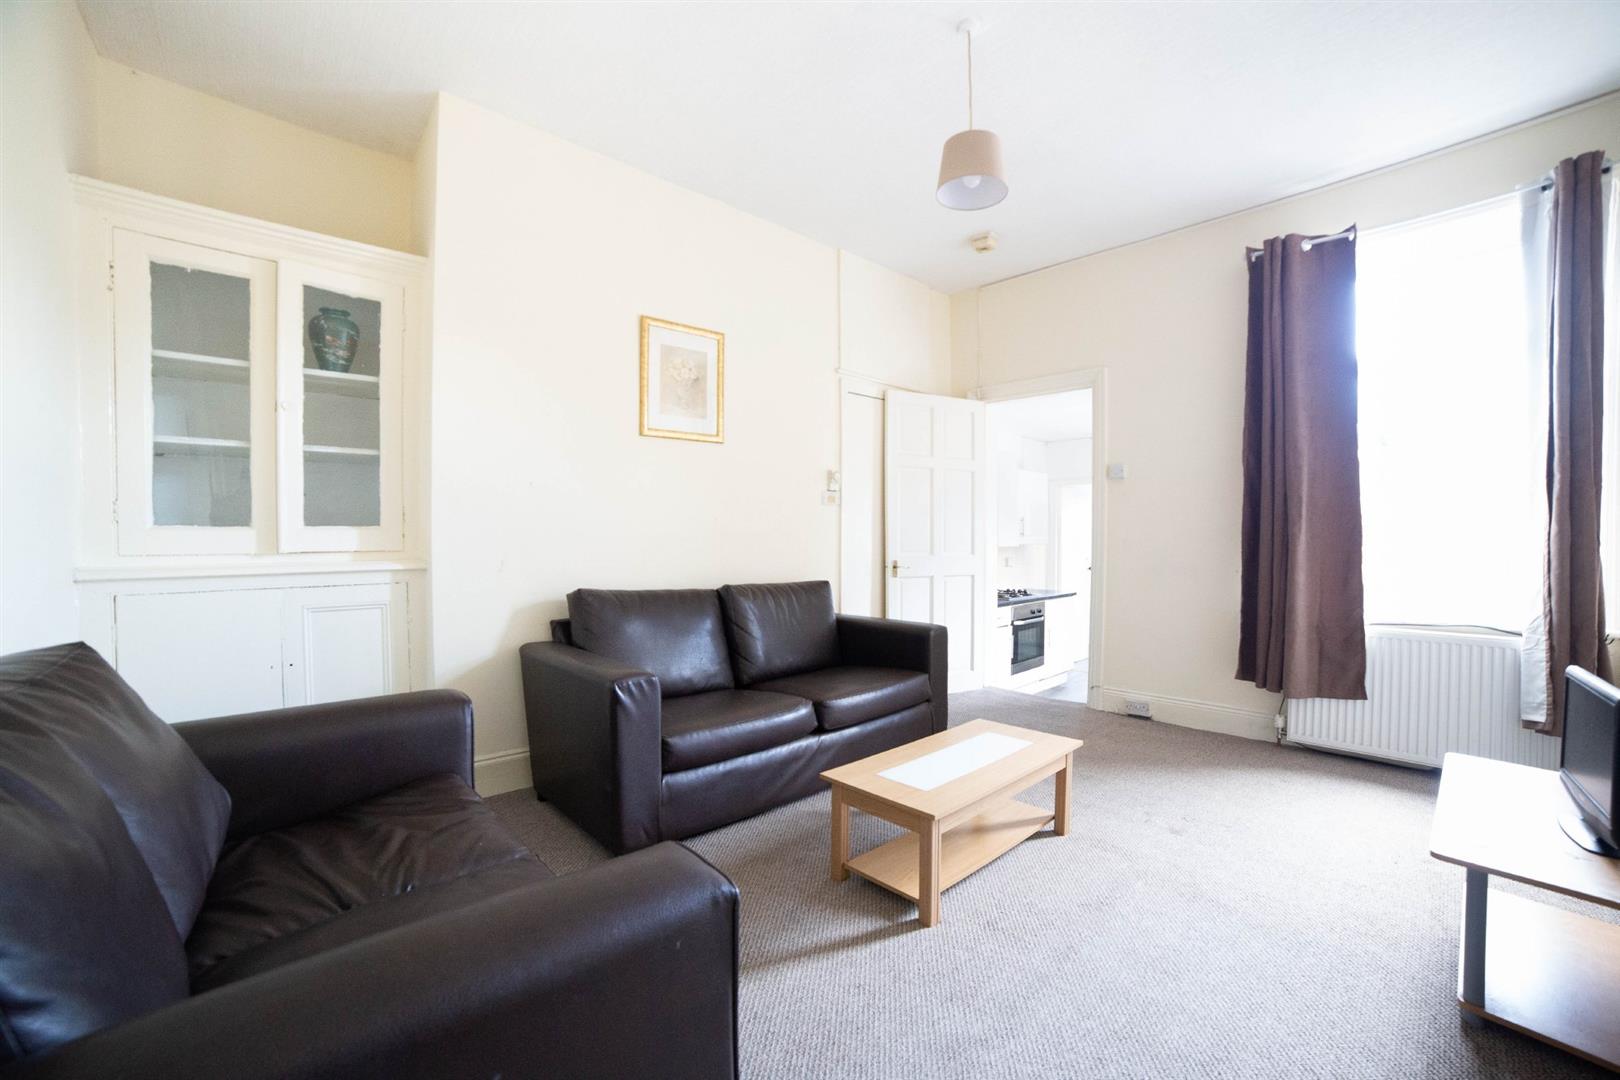 2 bed flat to rent in Rothbury Terrace, Newcastle Upon Tyne - Property Image 1